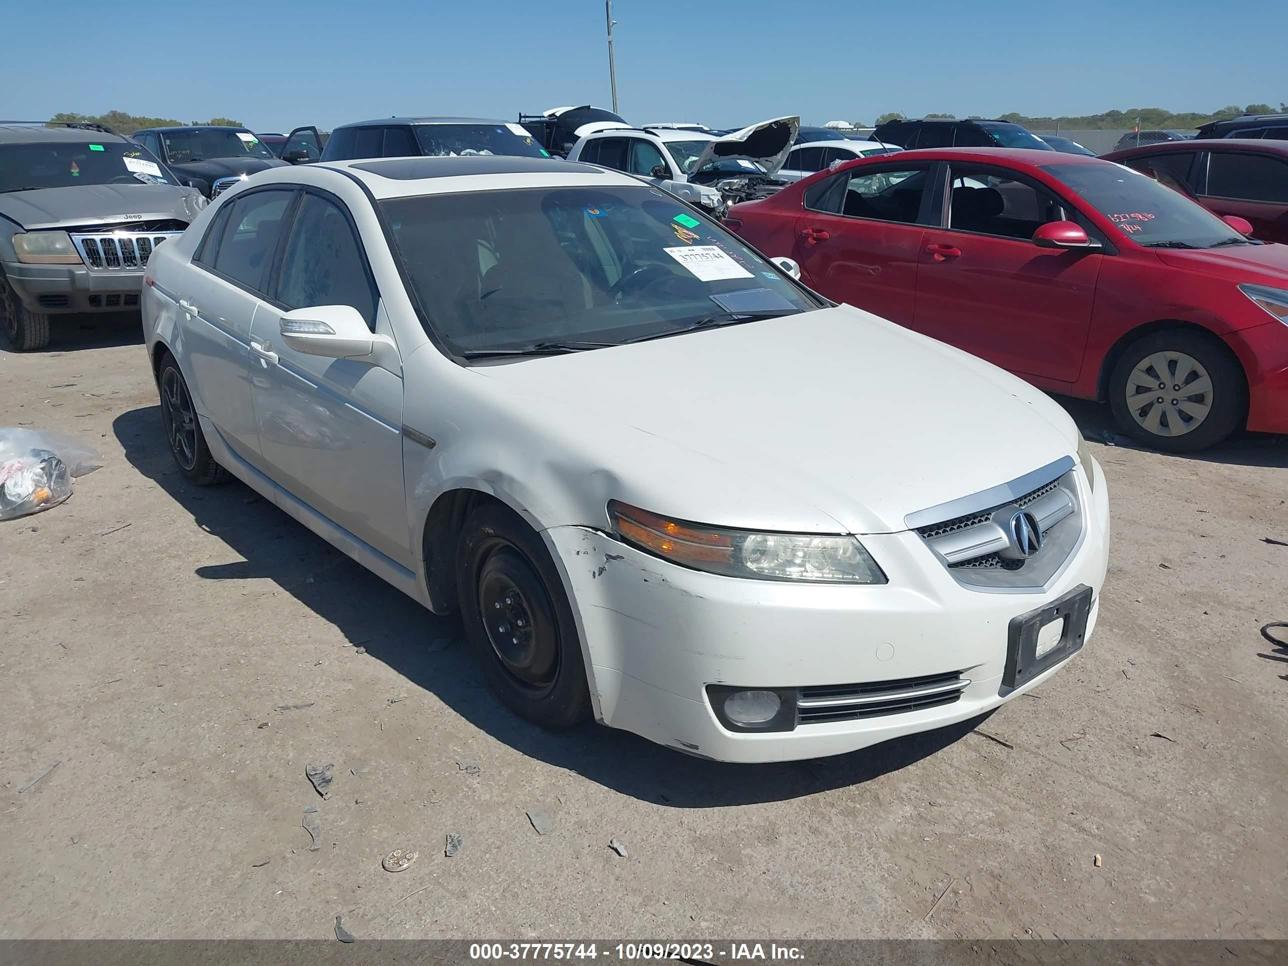 vin: 19UUA66218A048558 19UUA66218A048558 2008 acura tl 3200 for Sale in 76247, 3748 Mcpherson Dr, Justin, USA